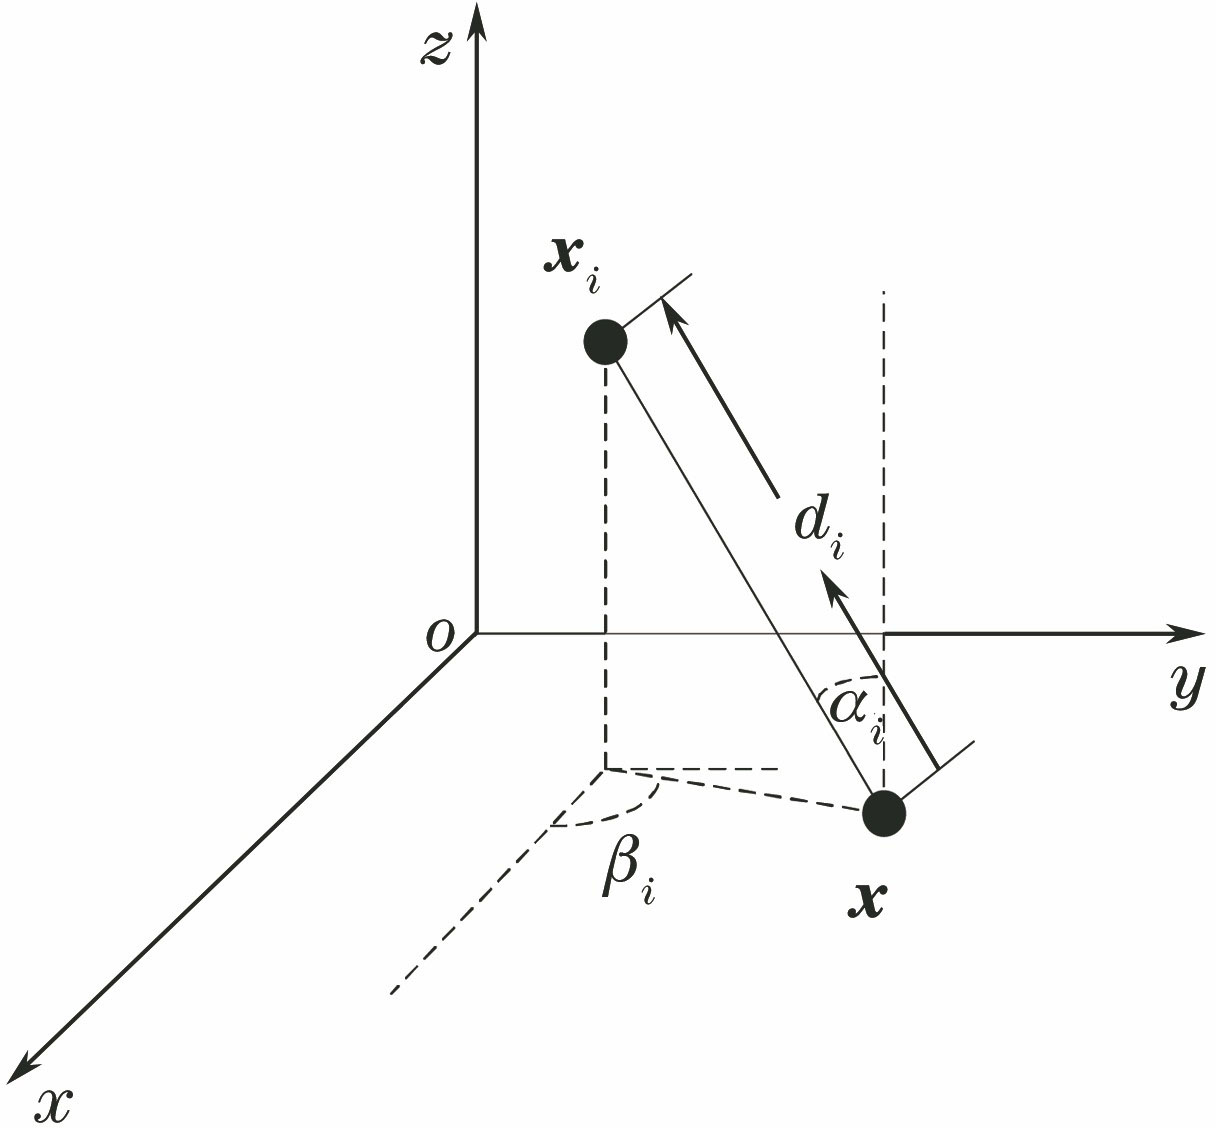 Positioning system in three-dimensional space